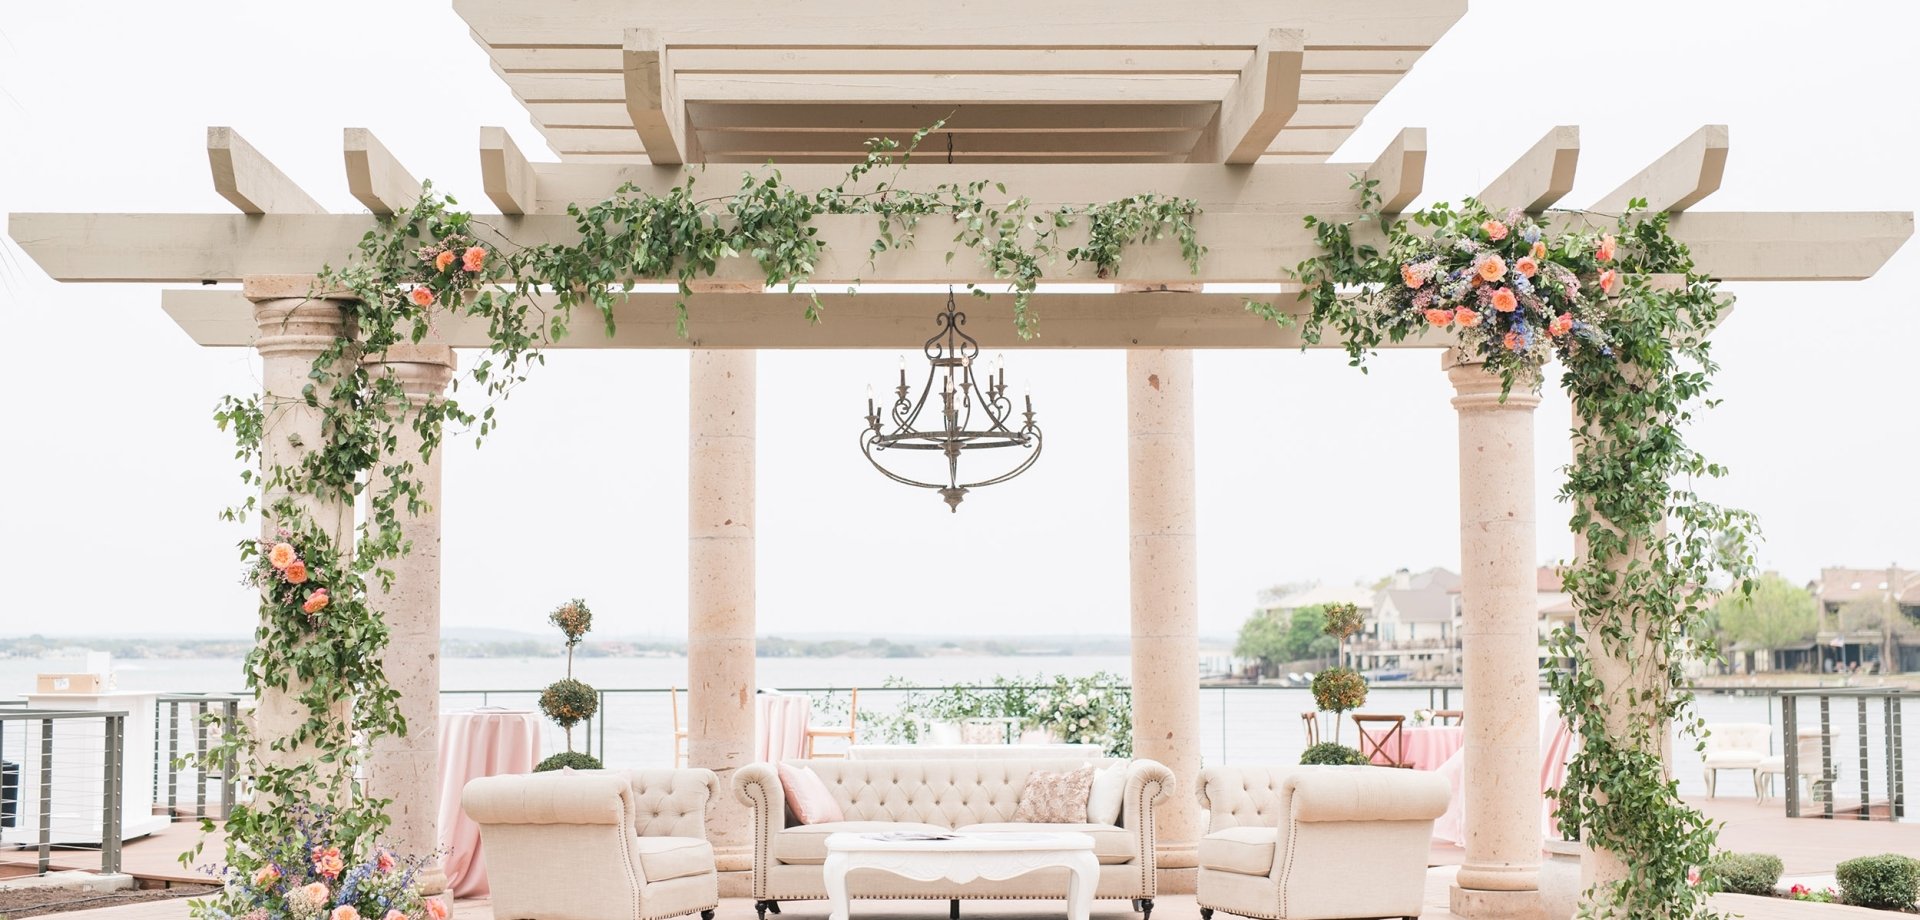 venue space in the Texas Hill Country. Large Arch with flowers overlooking the water.